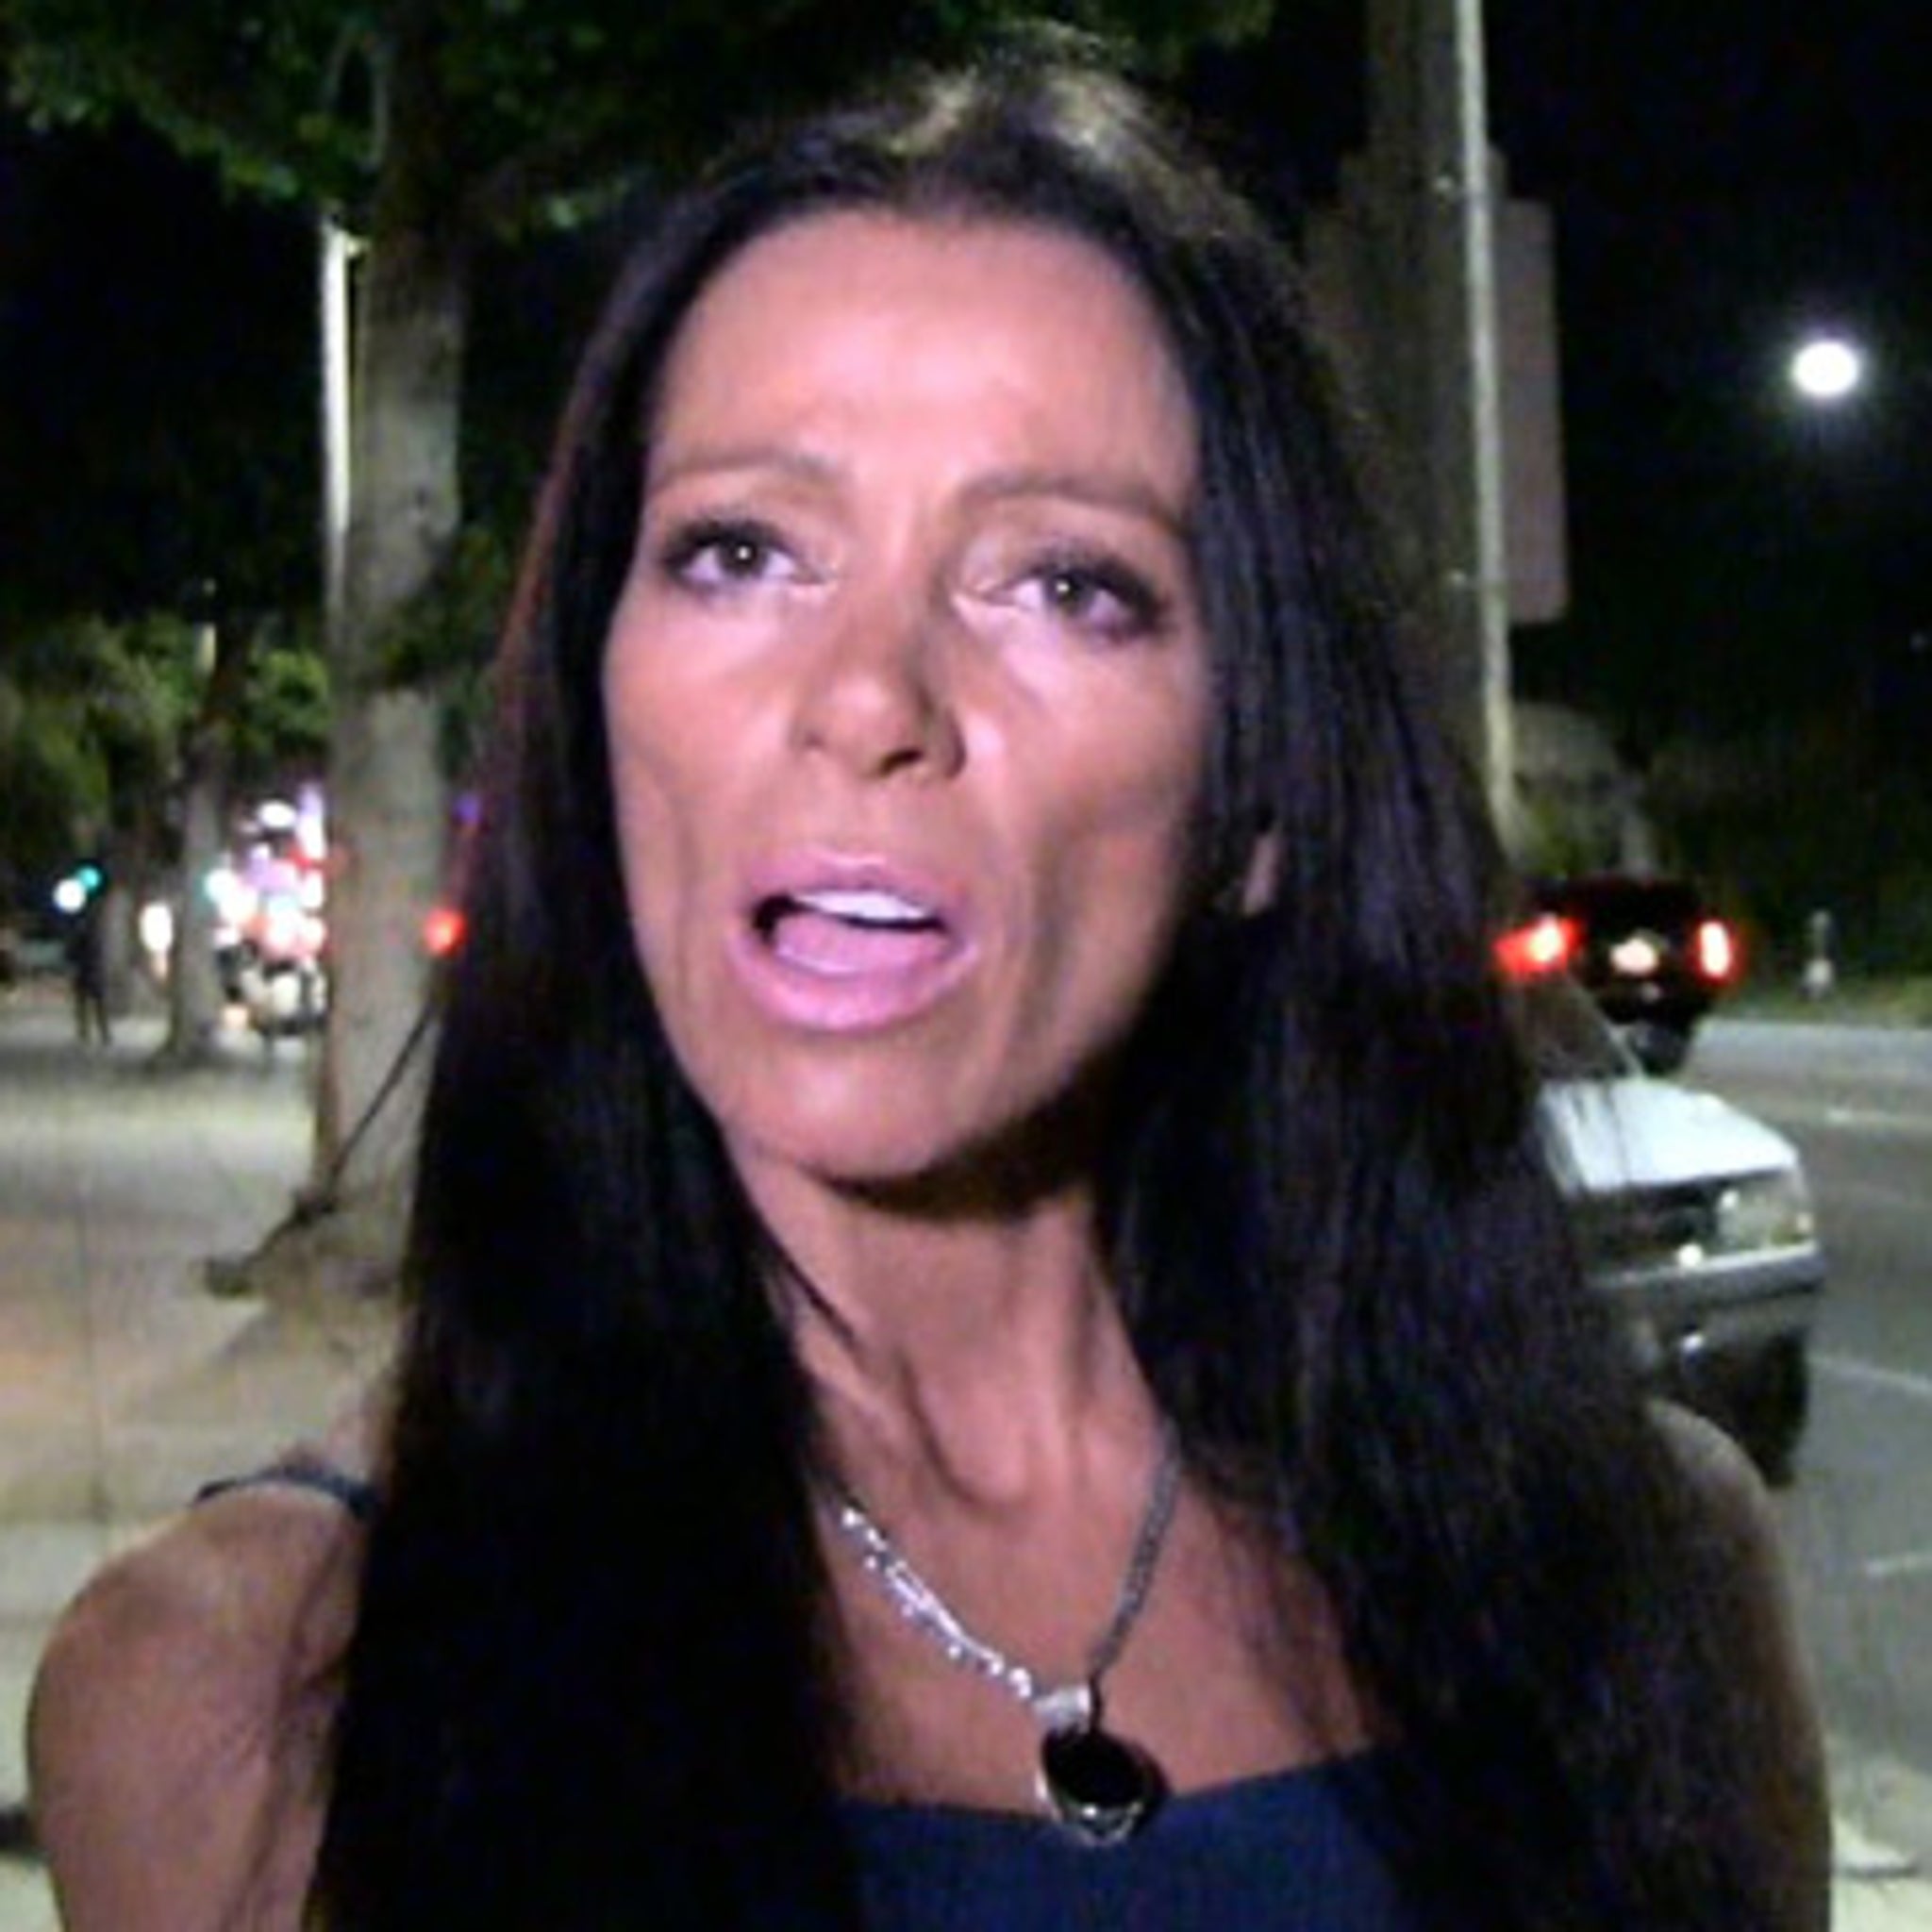 Carlton Gebbia -- Im Joining Real Housewives of Beverly Hills to Empower Women